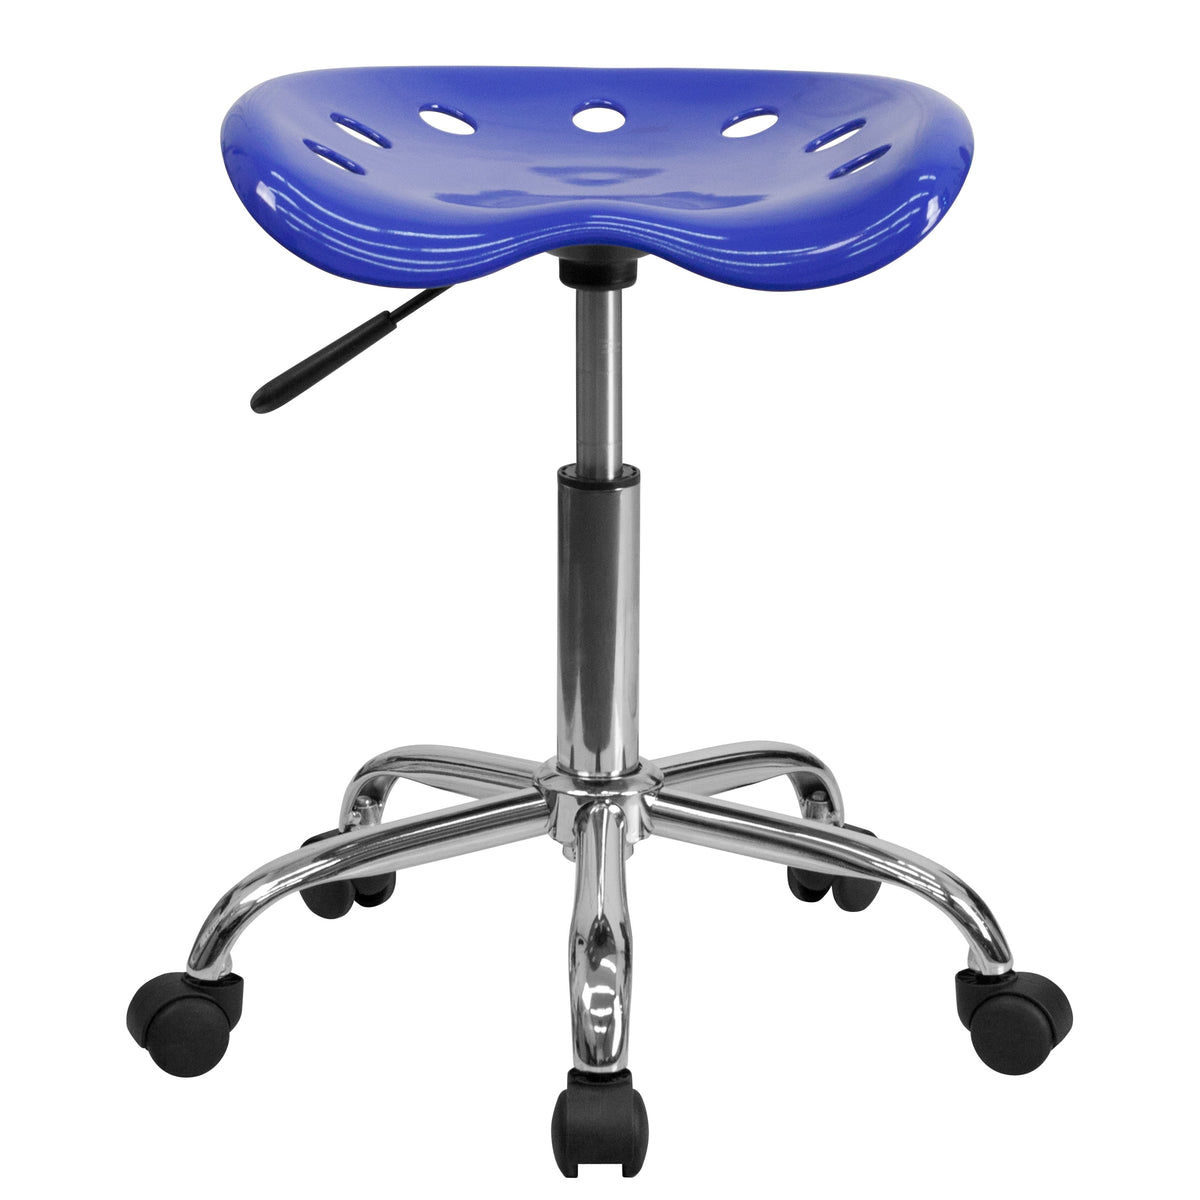 Nautical Blue |#| Vibrant Nautical Blue Tractor Seat and Chrome Stool - Drafting & Office Stools